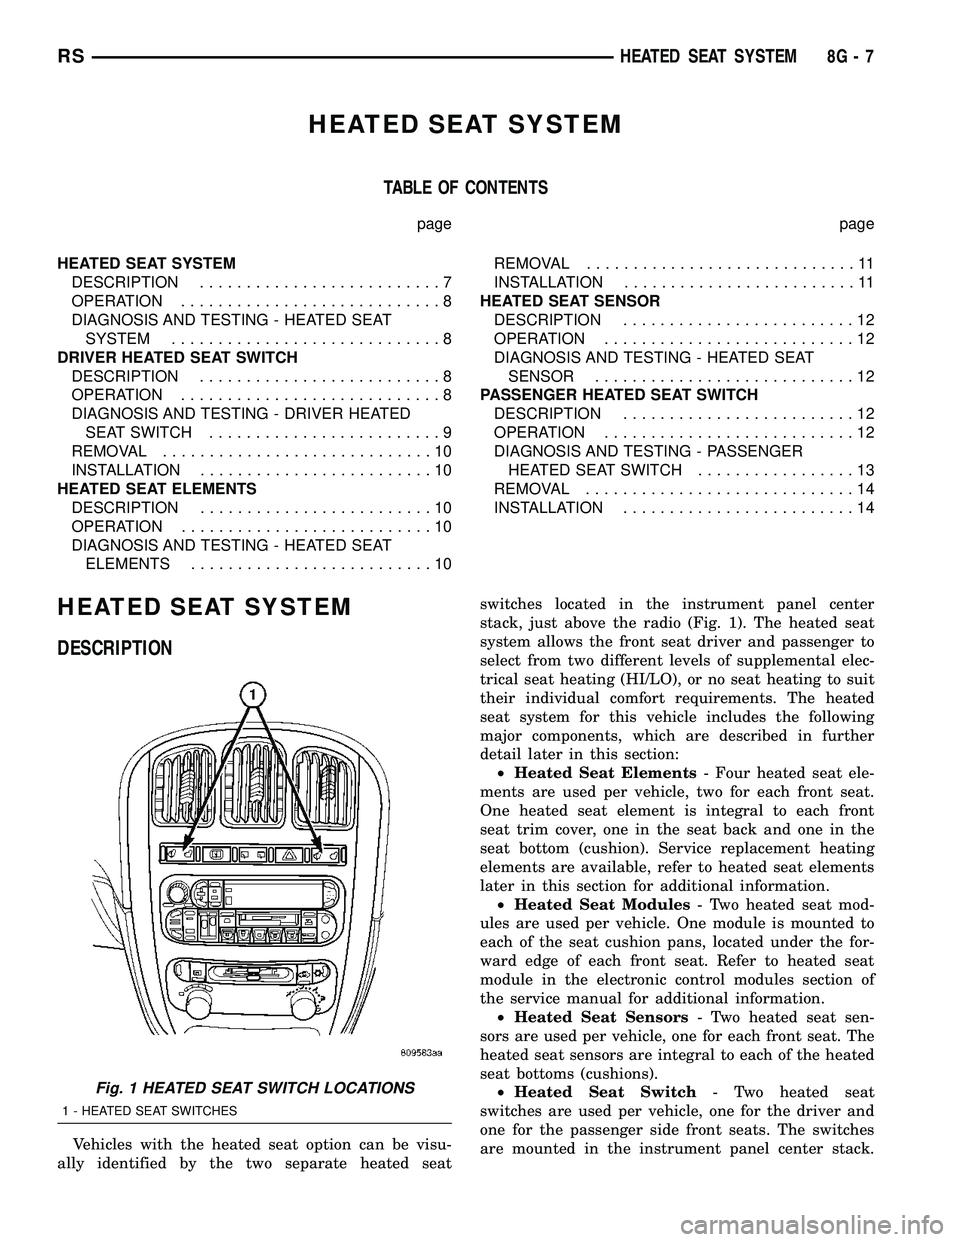 DODGE TOWN AND COUNTRY 2004  Service Manual HEATED SEAT SYSTEM
TABLE OF CONTENTS
page page
HEATED SEAT SYSTEM
DESCRIPTION..........................7
OPERATION............................8
DIAGNOSIS AND TESTING - HEATED SEAT
SYSTEM..............